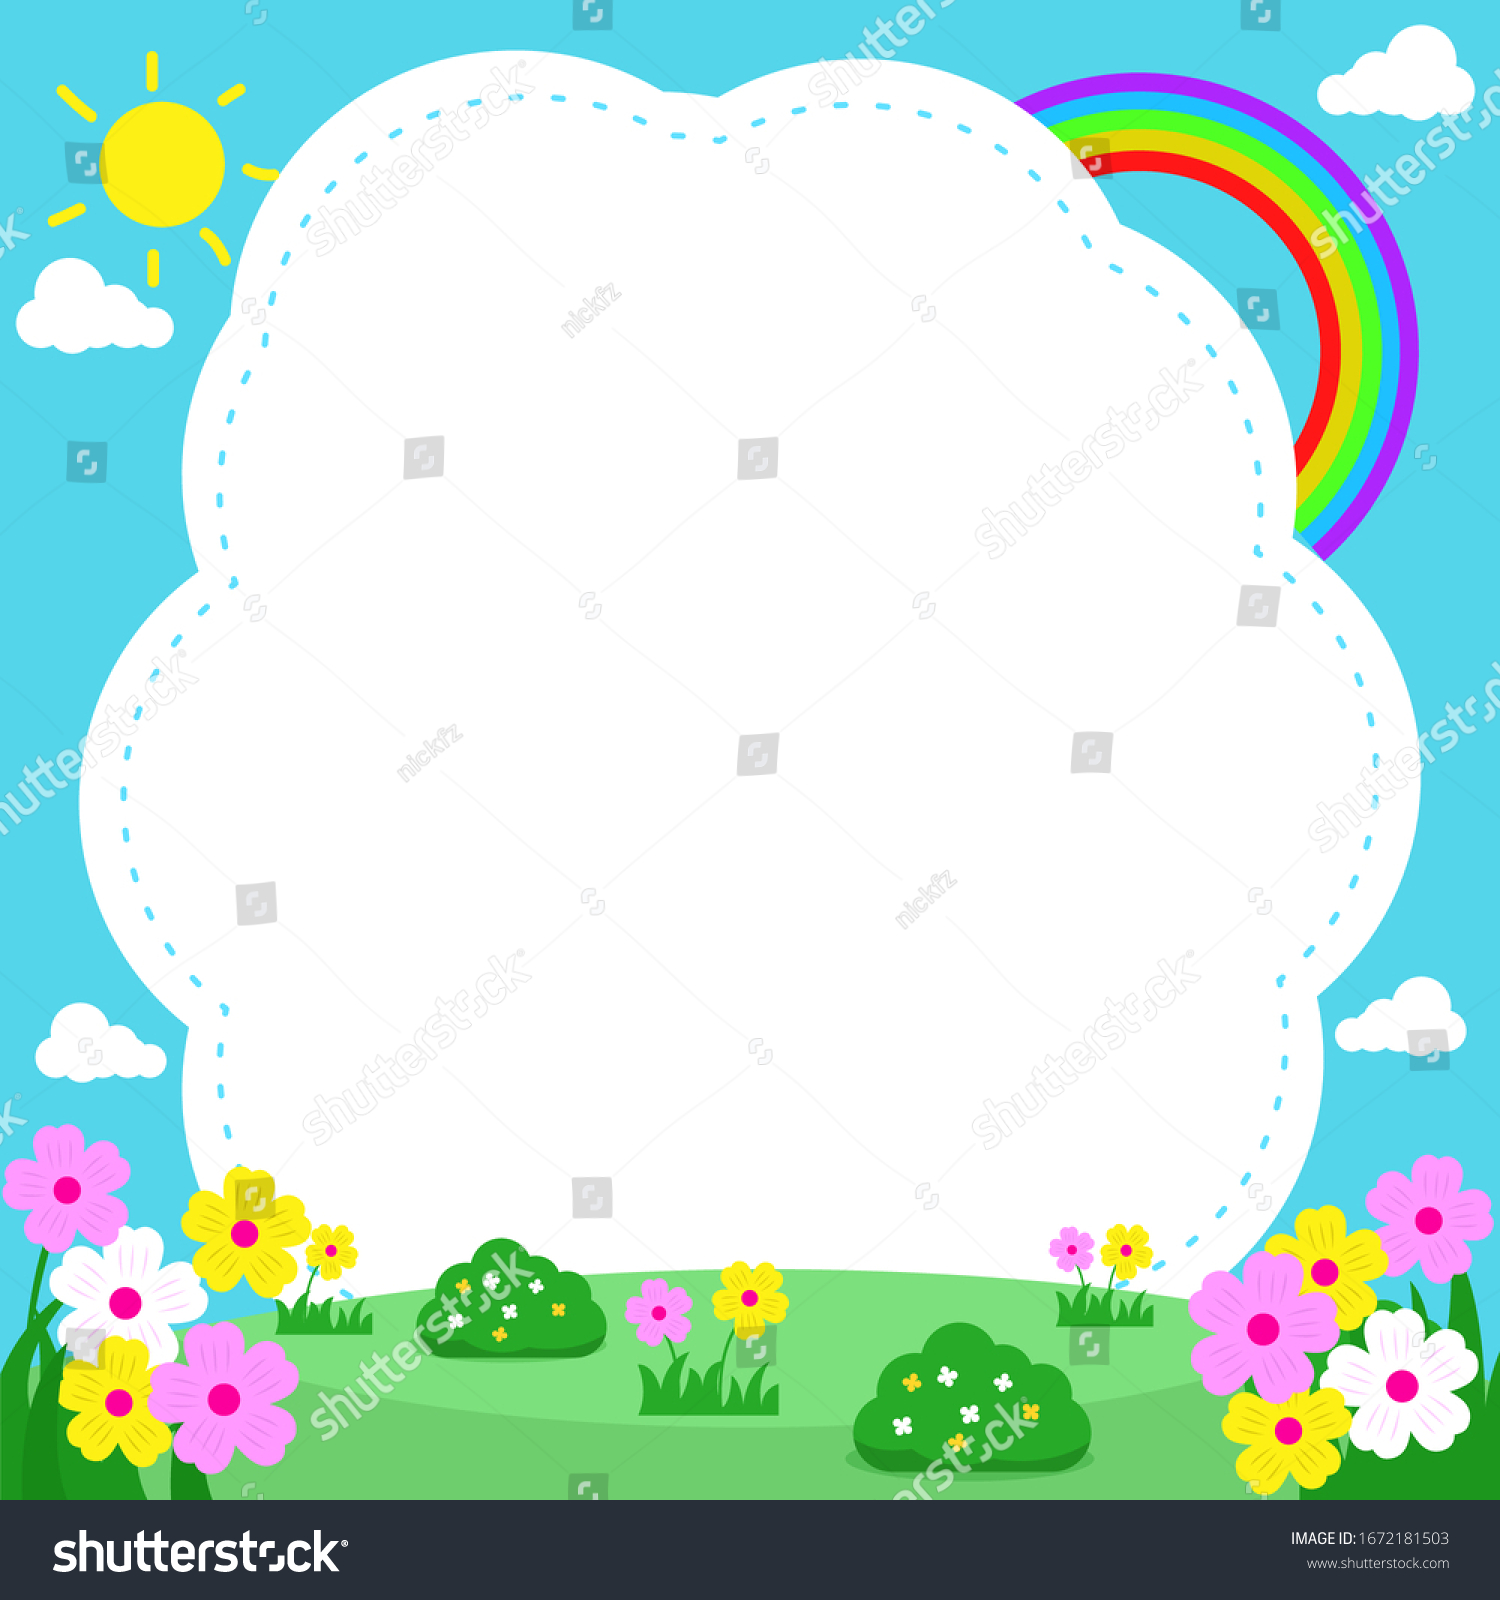 Cute Nature Landscape Background Frame Template Stock Vector (Royalty ...